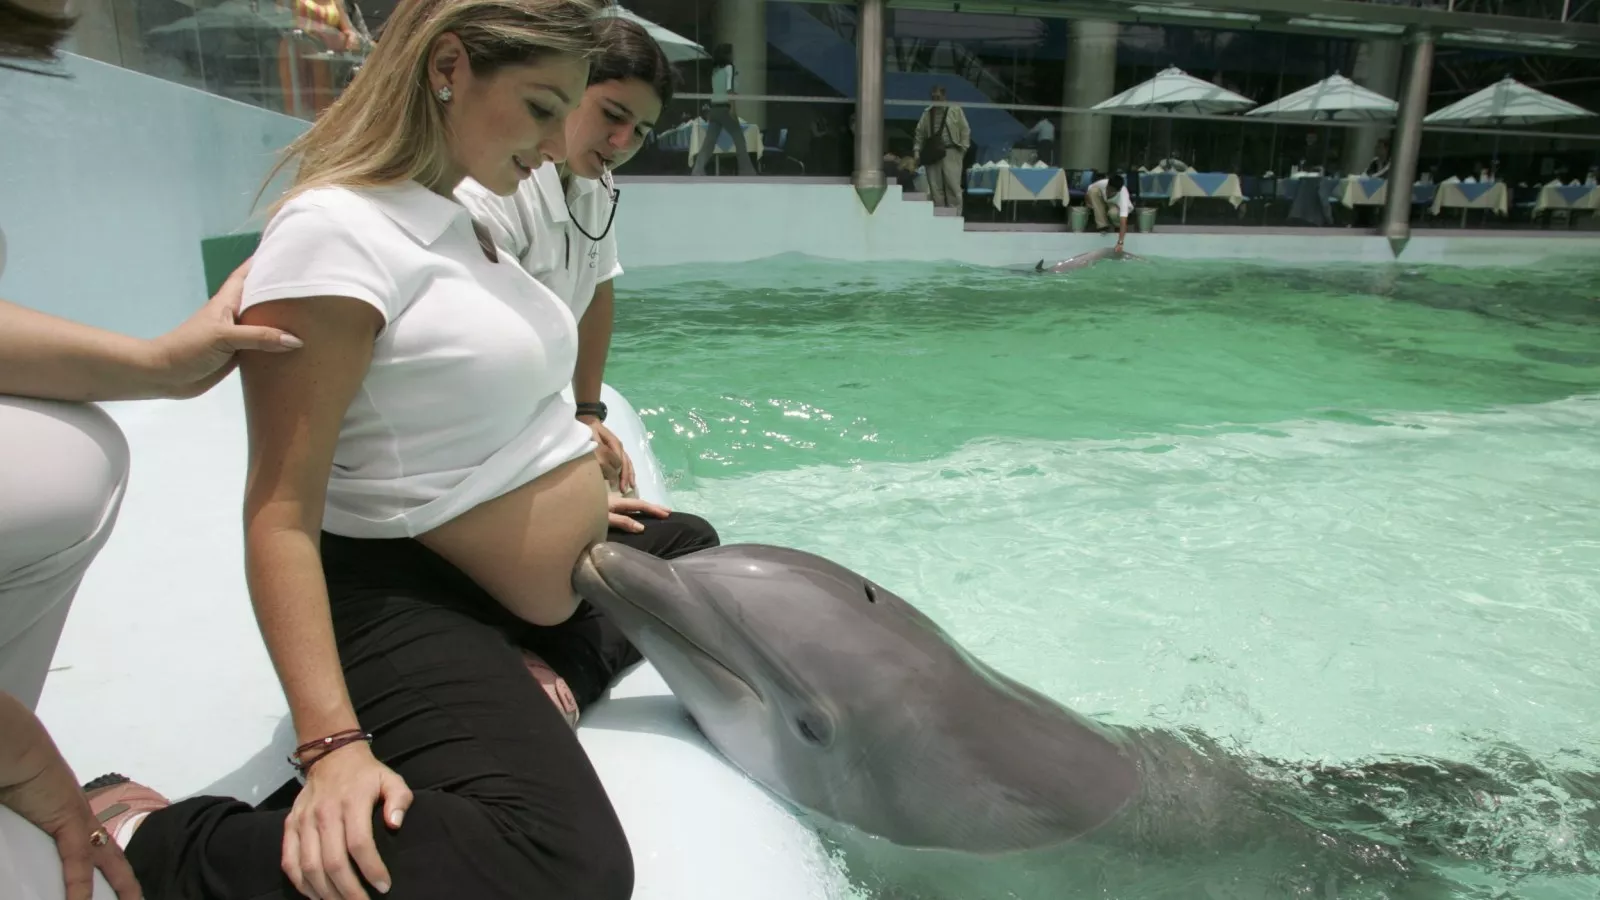 Dolphin-Assisted Child𝐛𝐢𝐫𝐭𝐡 Is a Bad Idea